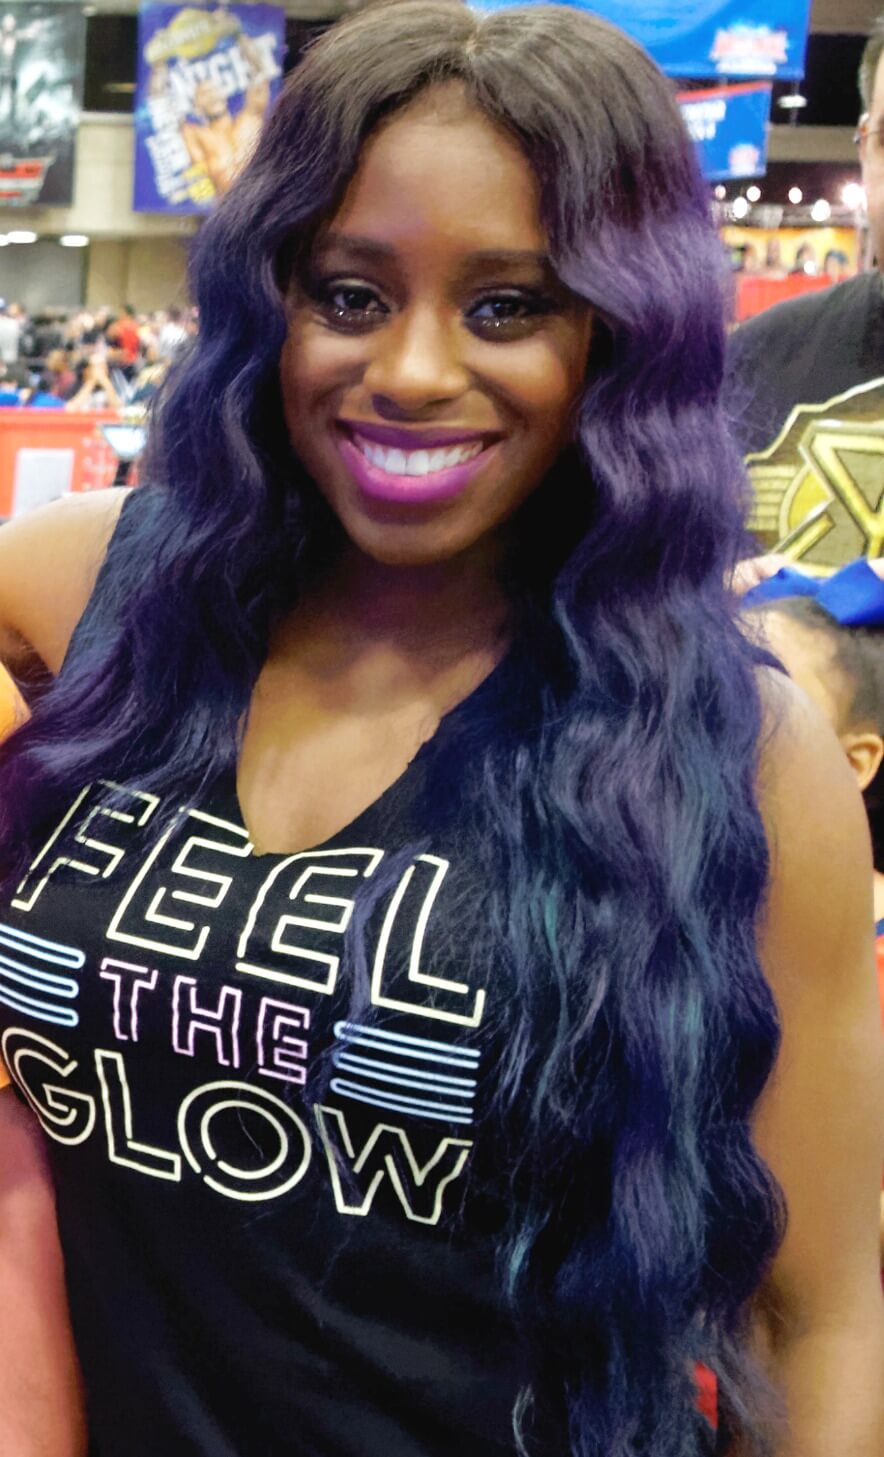 70+ Hot Pictures Of Naomi a.k.a Trinity Fatu from WWE Will Leave You Gasping For Her 588